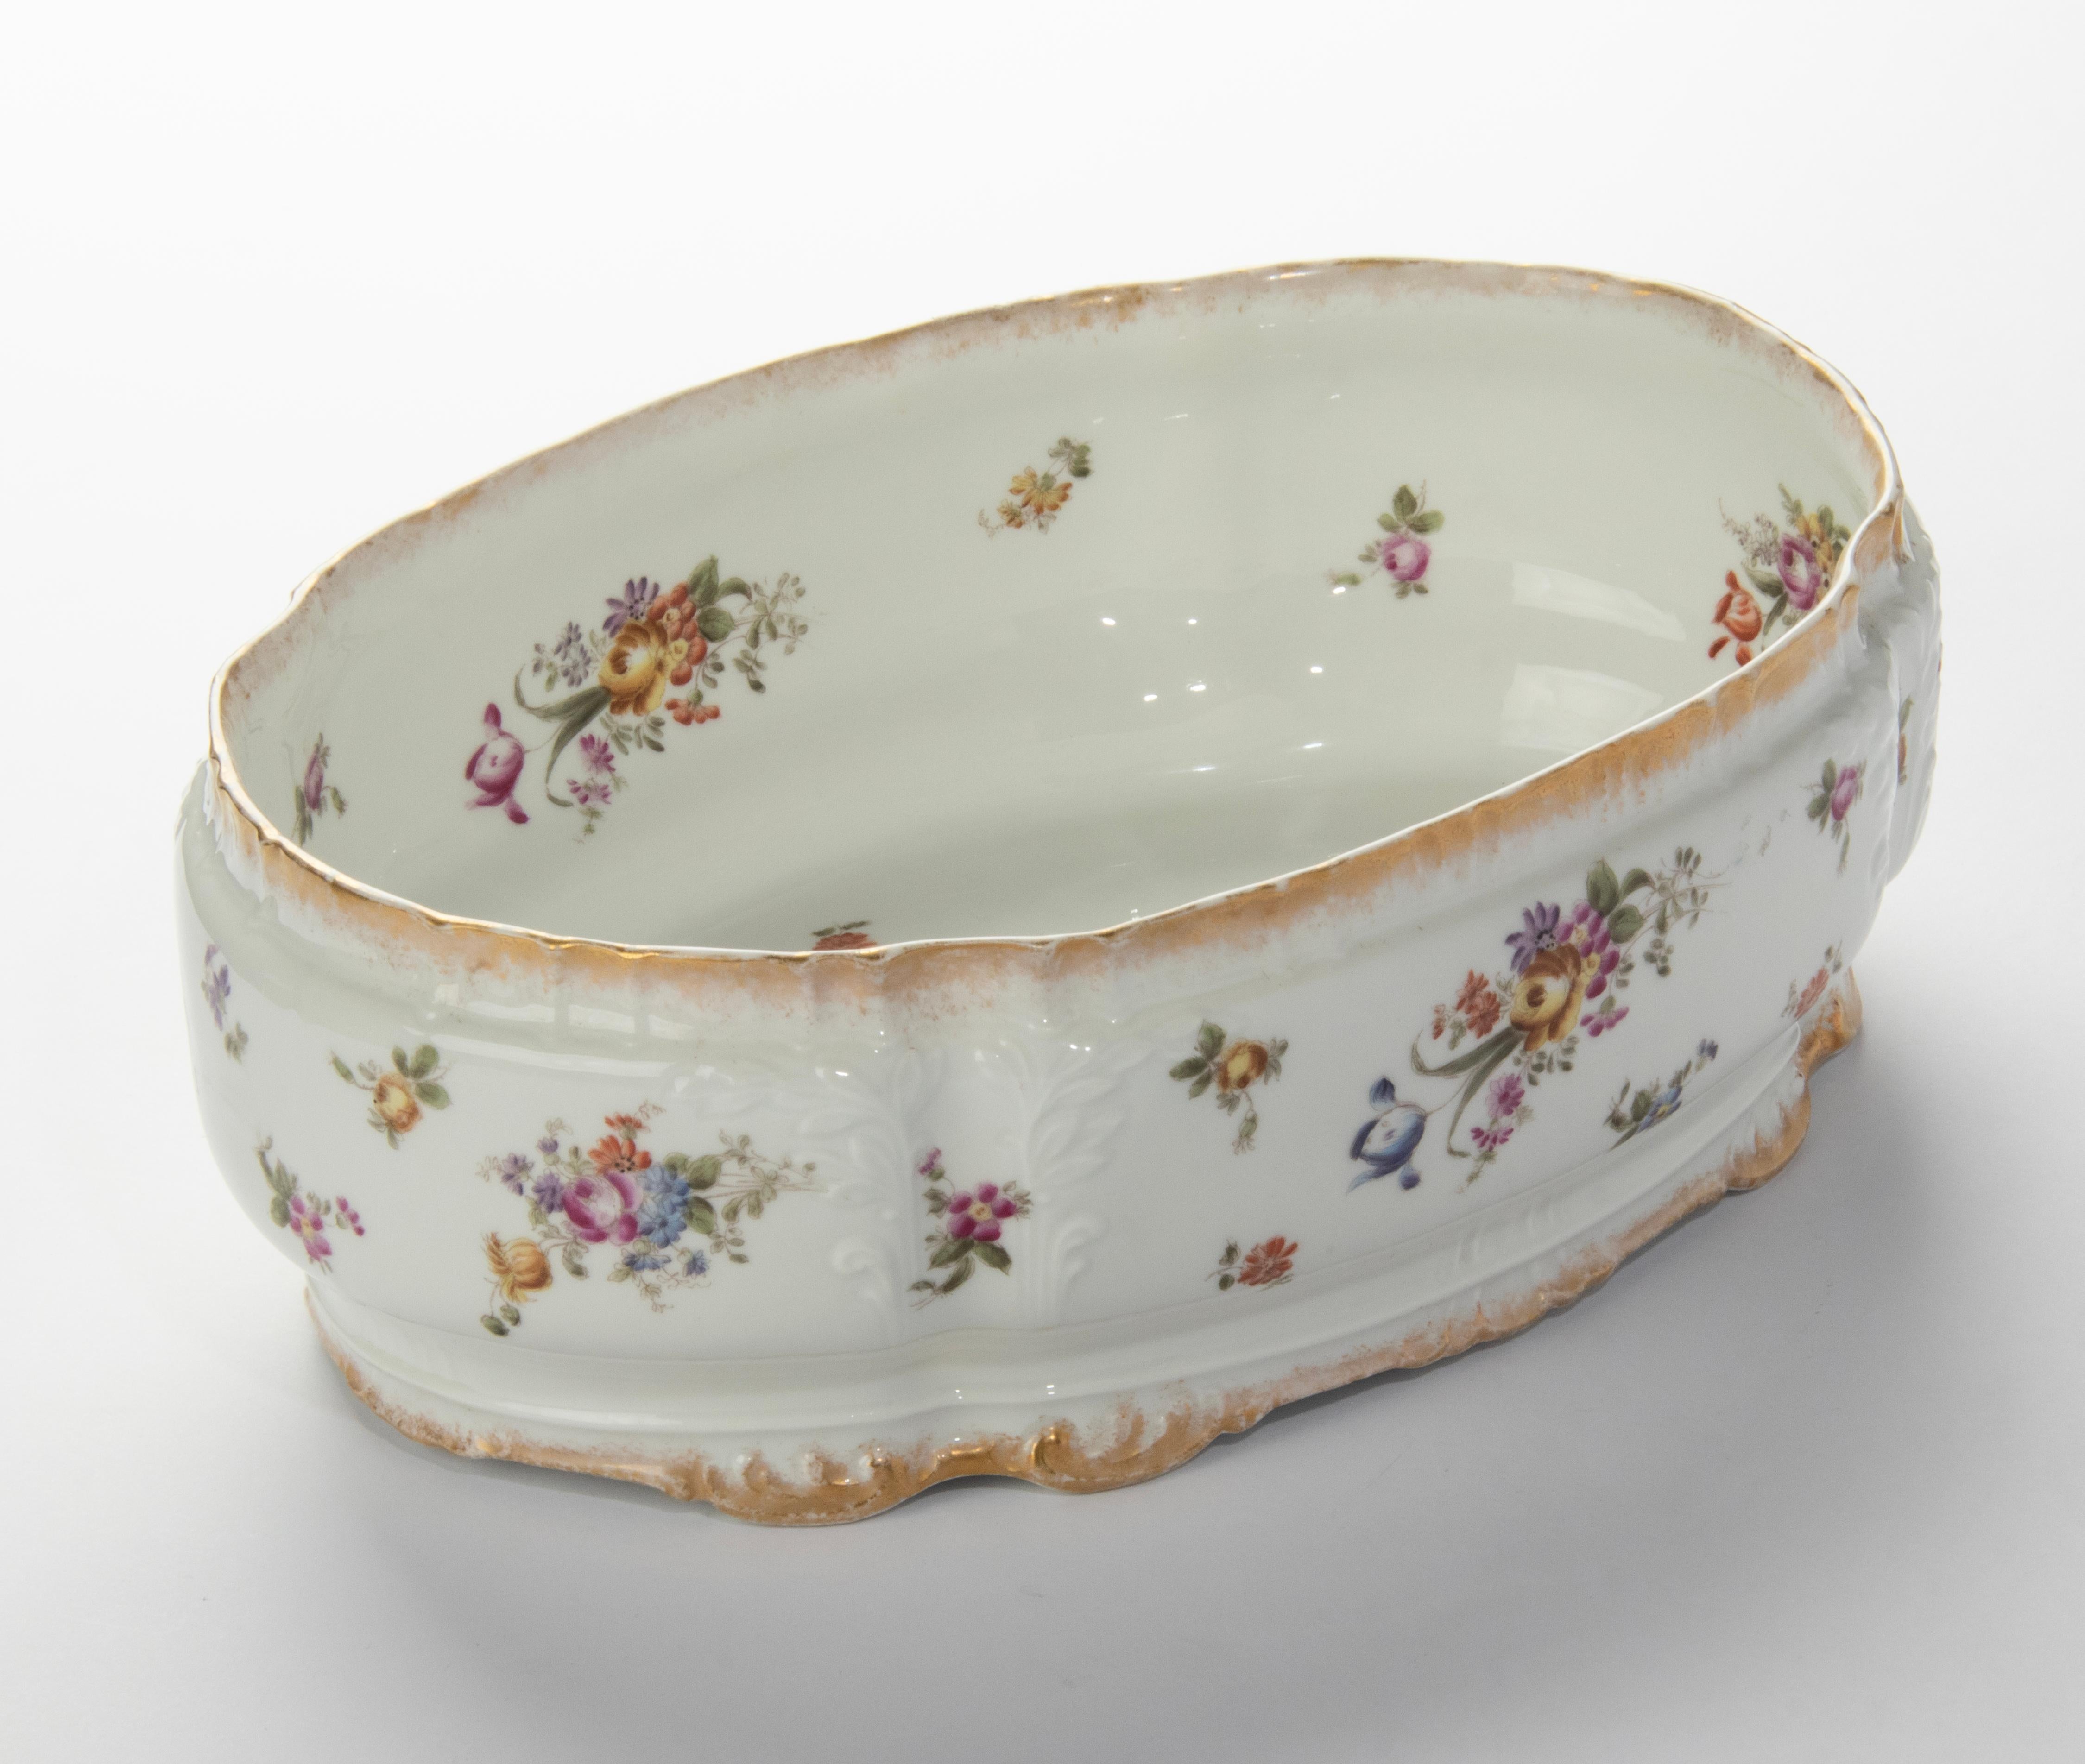 Early 20th Century Porcelain Jardinière Made by Limoges, France For Sale 11